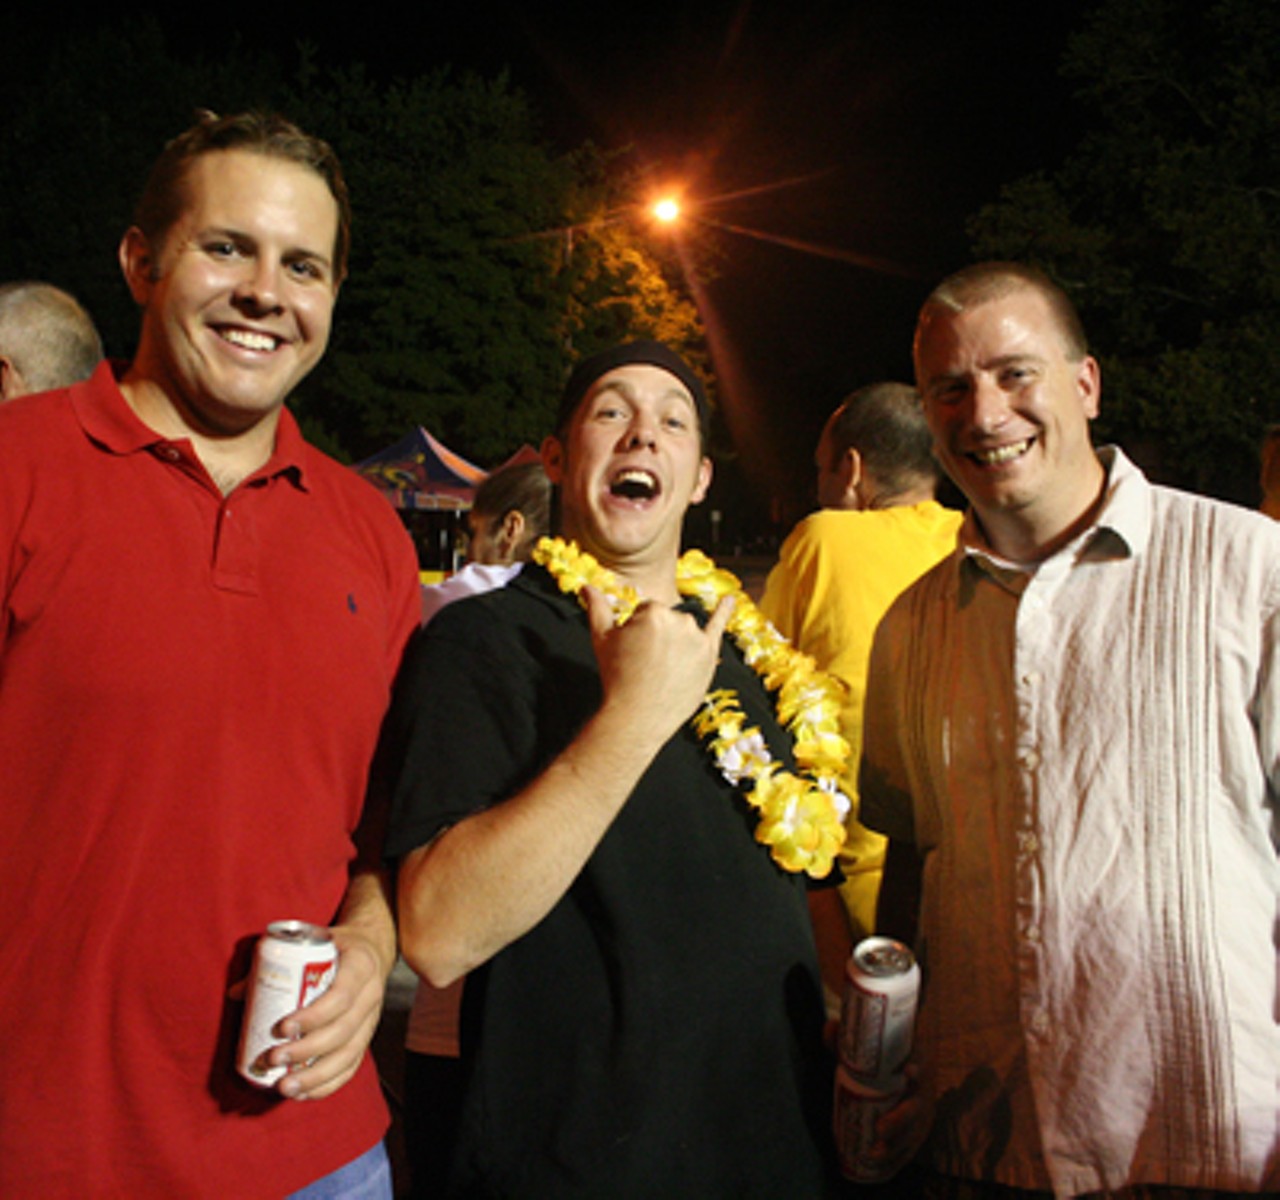 The guy in the middle was celebrating his bachelor's party with his buds and Bud at the races.